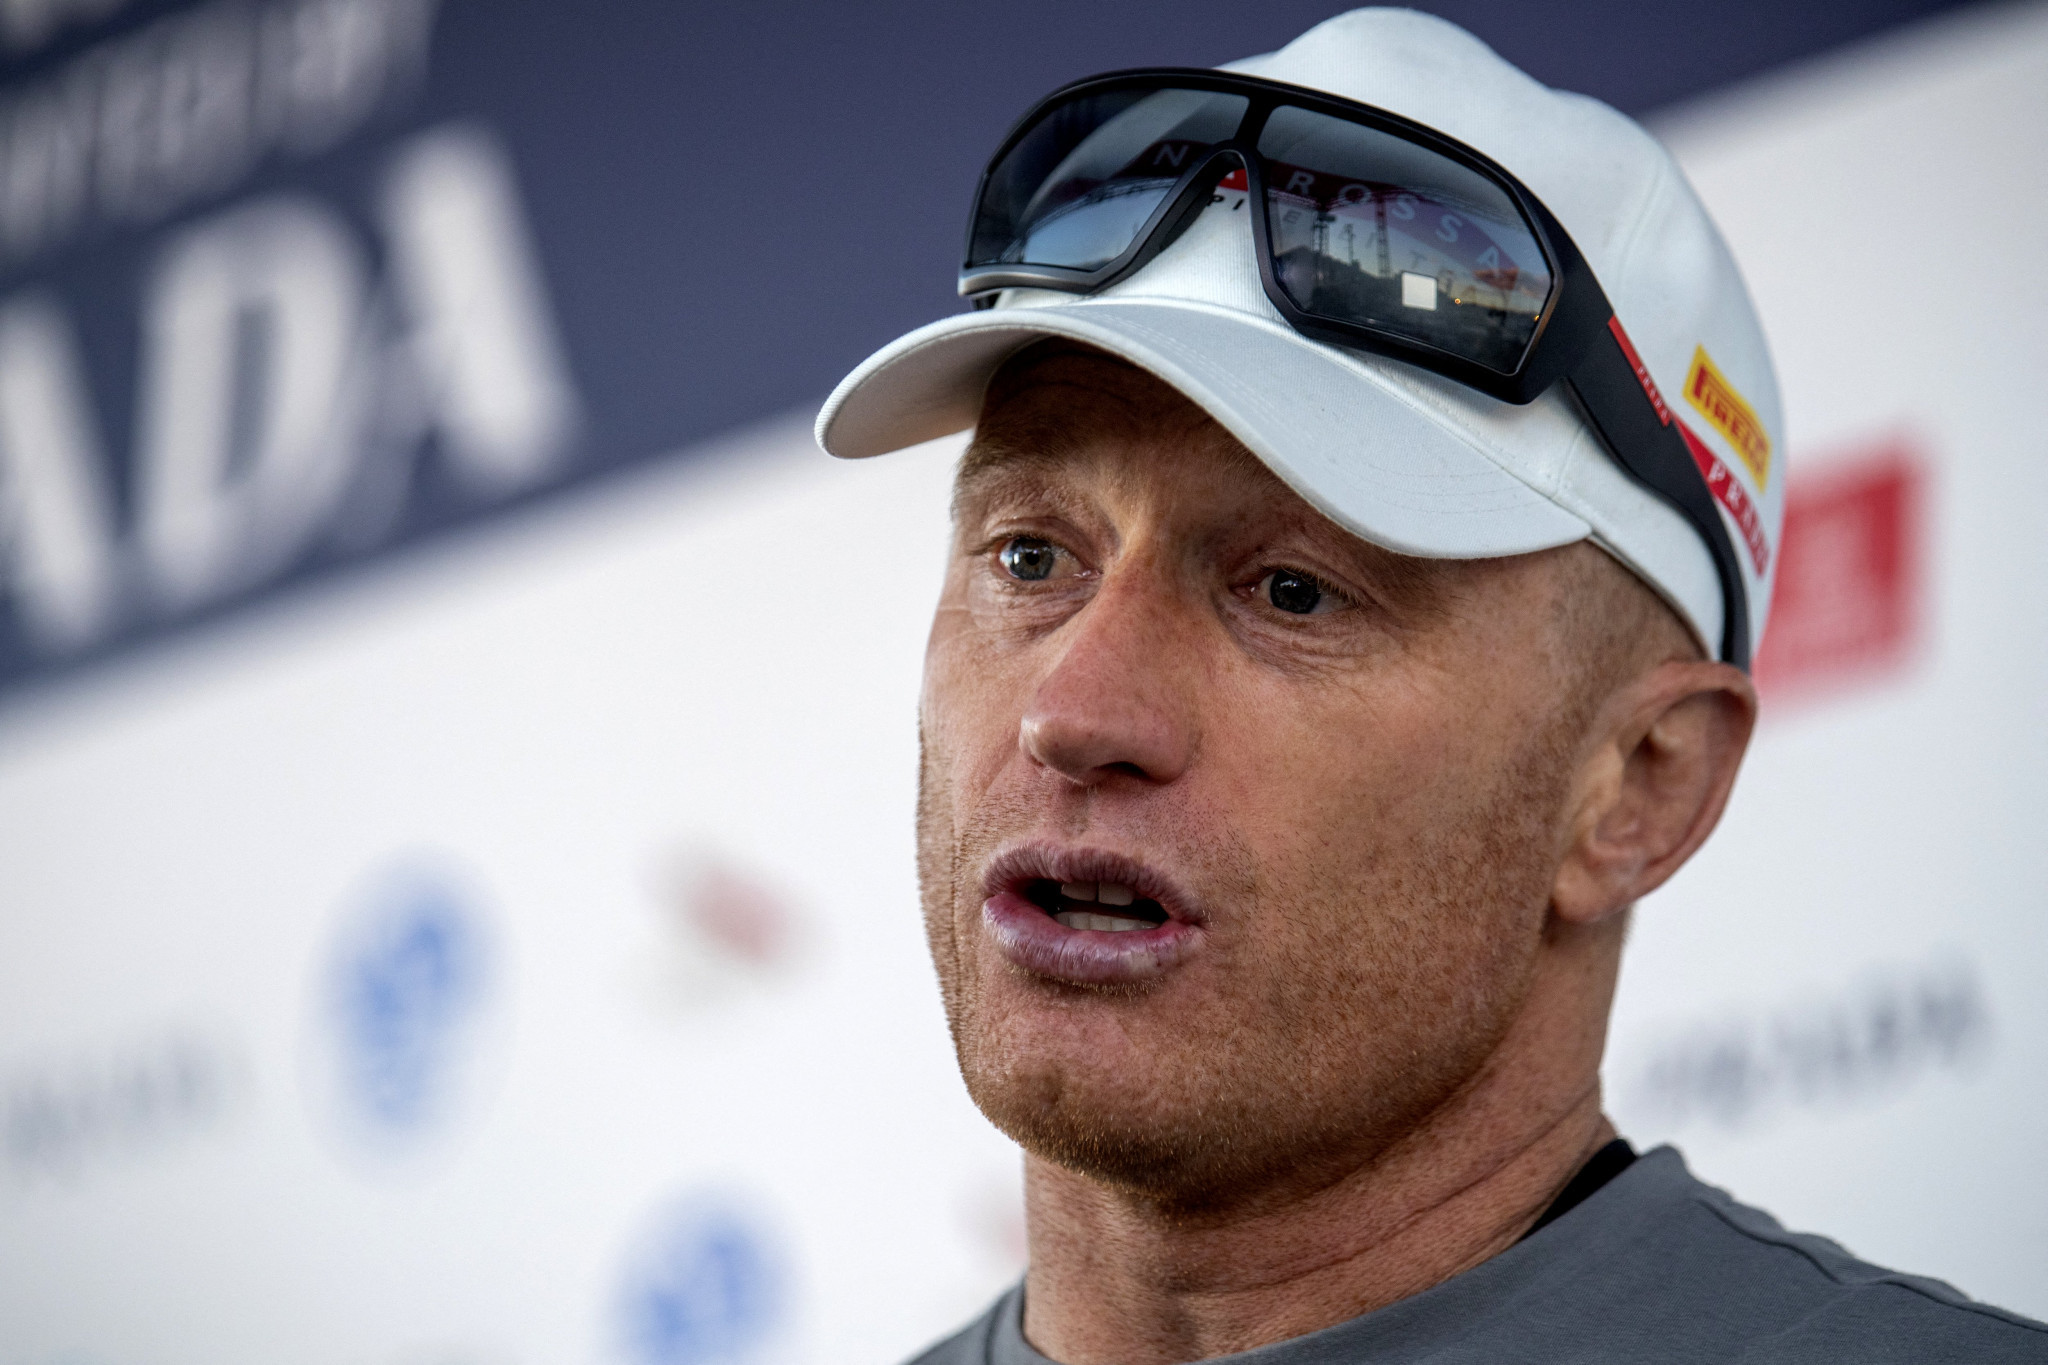 Luna Rossa co-helmsman Jimmy Spithill believes Team New Zealand remain favourites despite his side's strong start to this year's America's Cup ©Getty Images